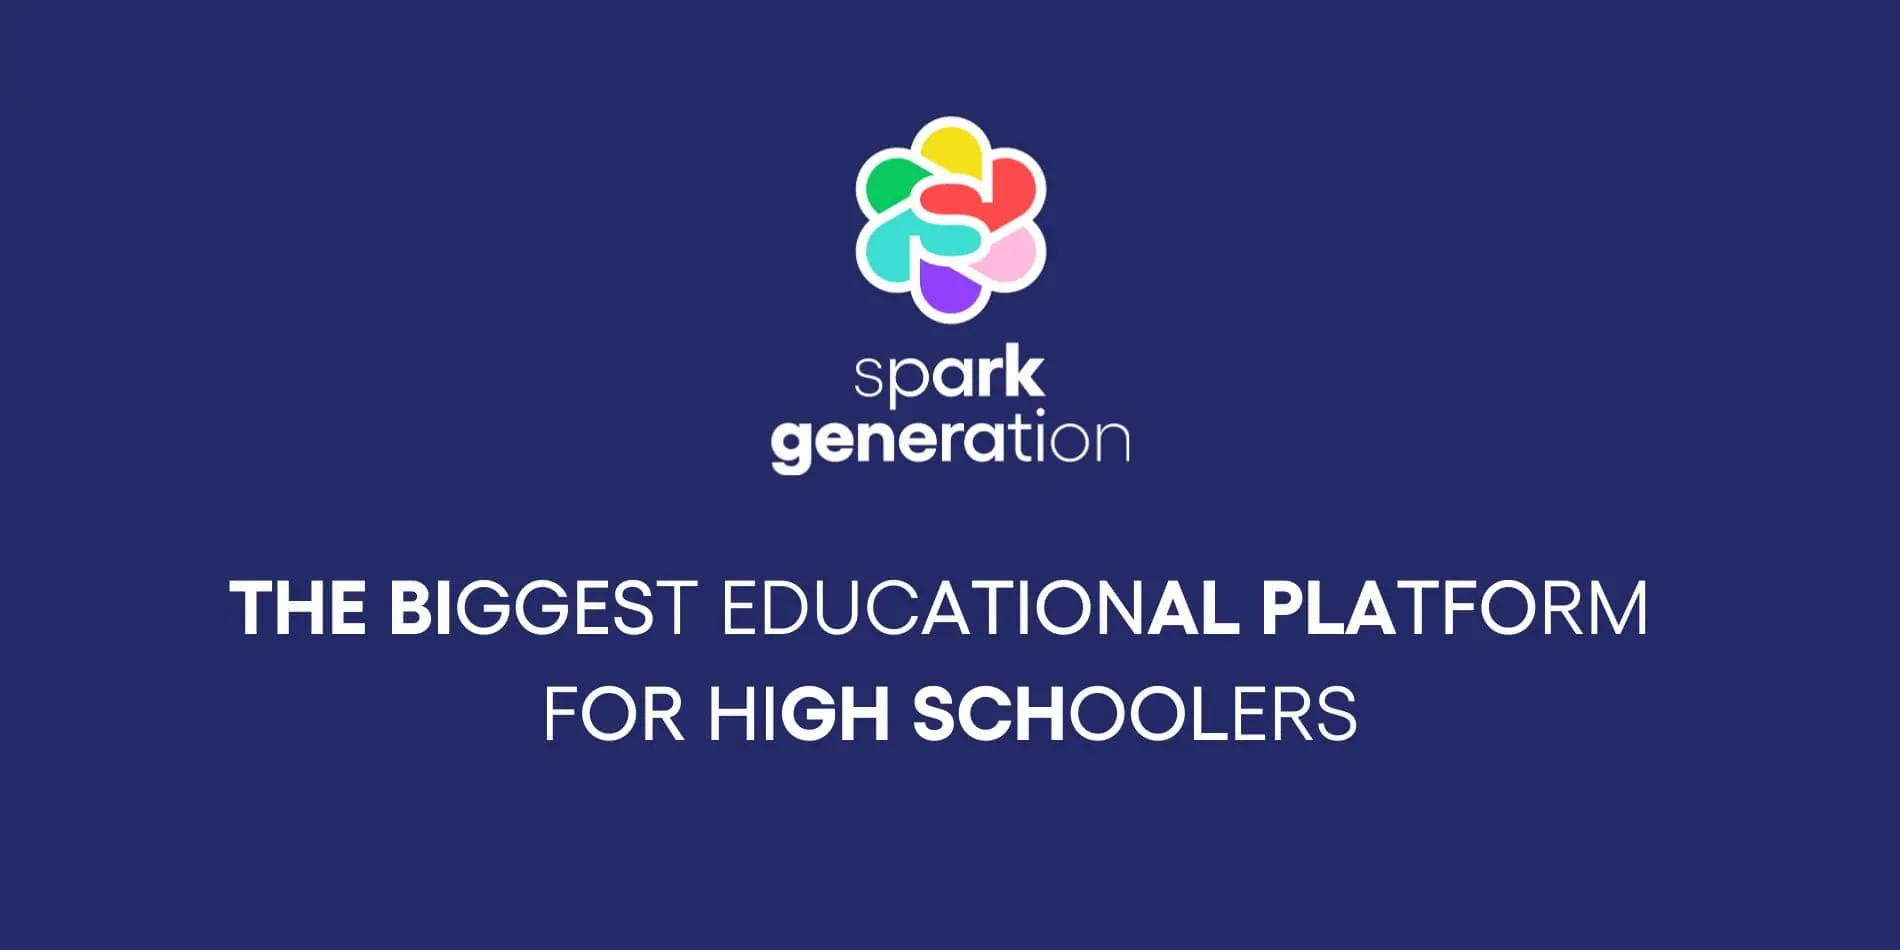 spark-generation-cover-photo spark-generation-cover-photo Spark Generation spark-generation-cover-photo Top 3 British Online Schools in the World | World Schools